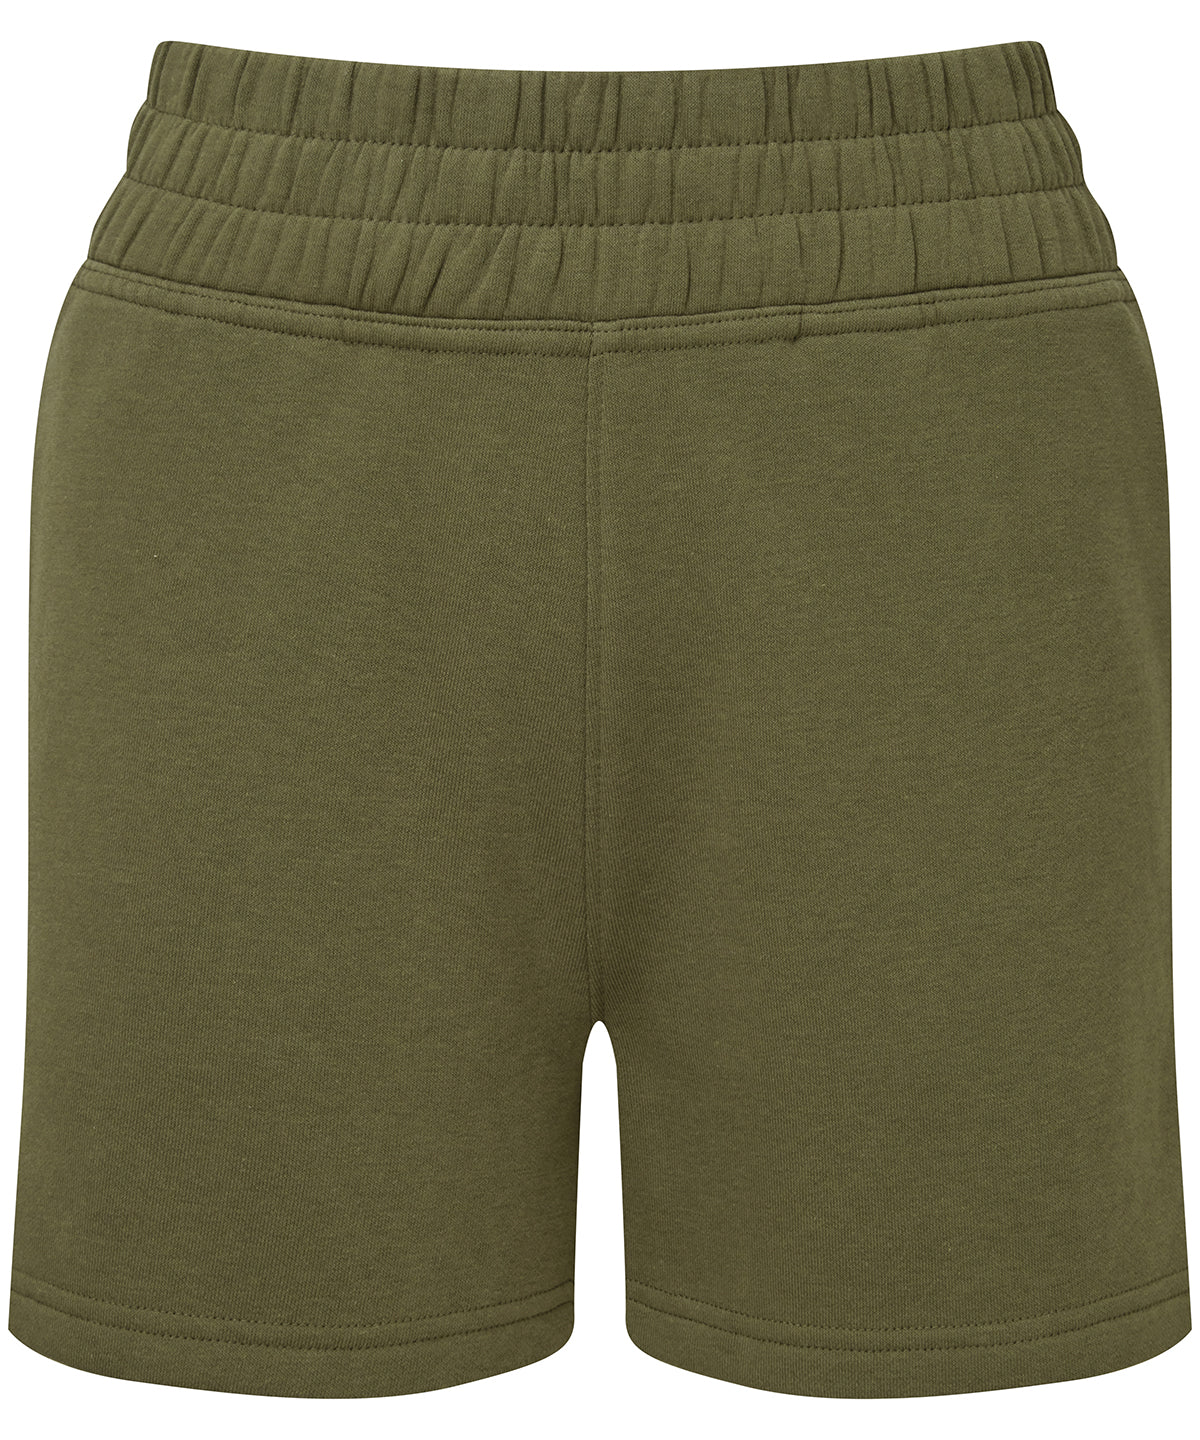 Olive - Women's TriDri® jogger shorts Shorts TriDri® Co-ords, Everyday Essentials, Exclusives, Must Haves, New For 2021, New In Autumn Winter, New In Mid Year, Street Casual, Streetwear, Tracksuits, Trousers & Shorts, Women's Fashion, Working From Home Schoolwear Centres